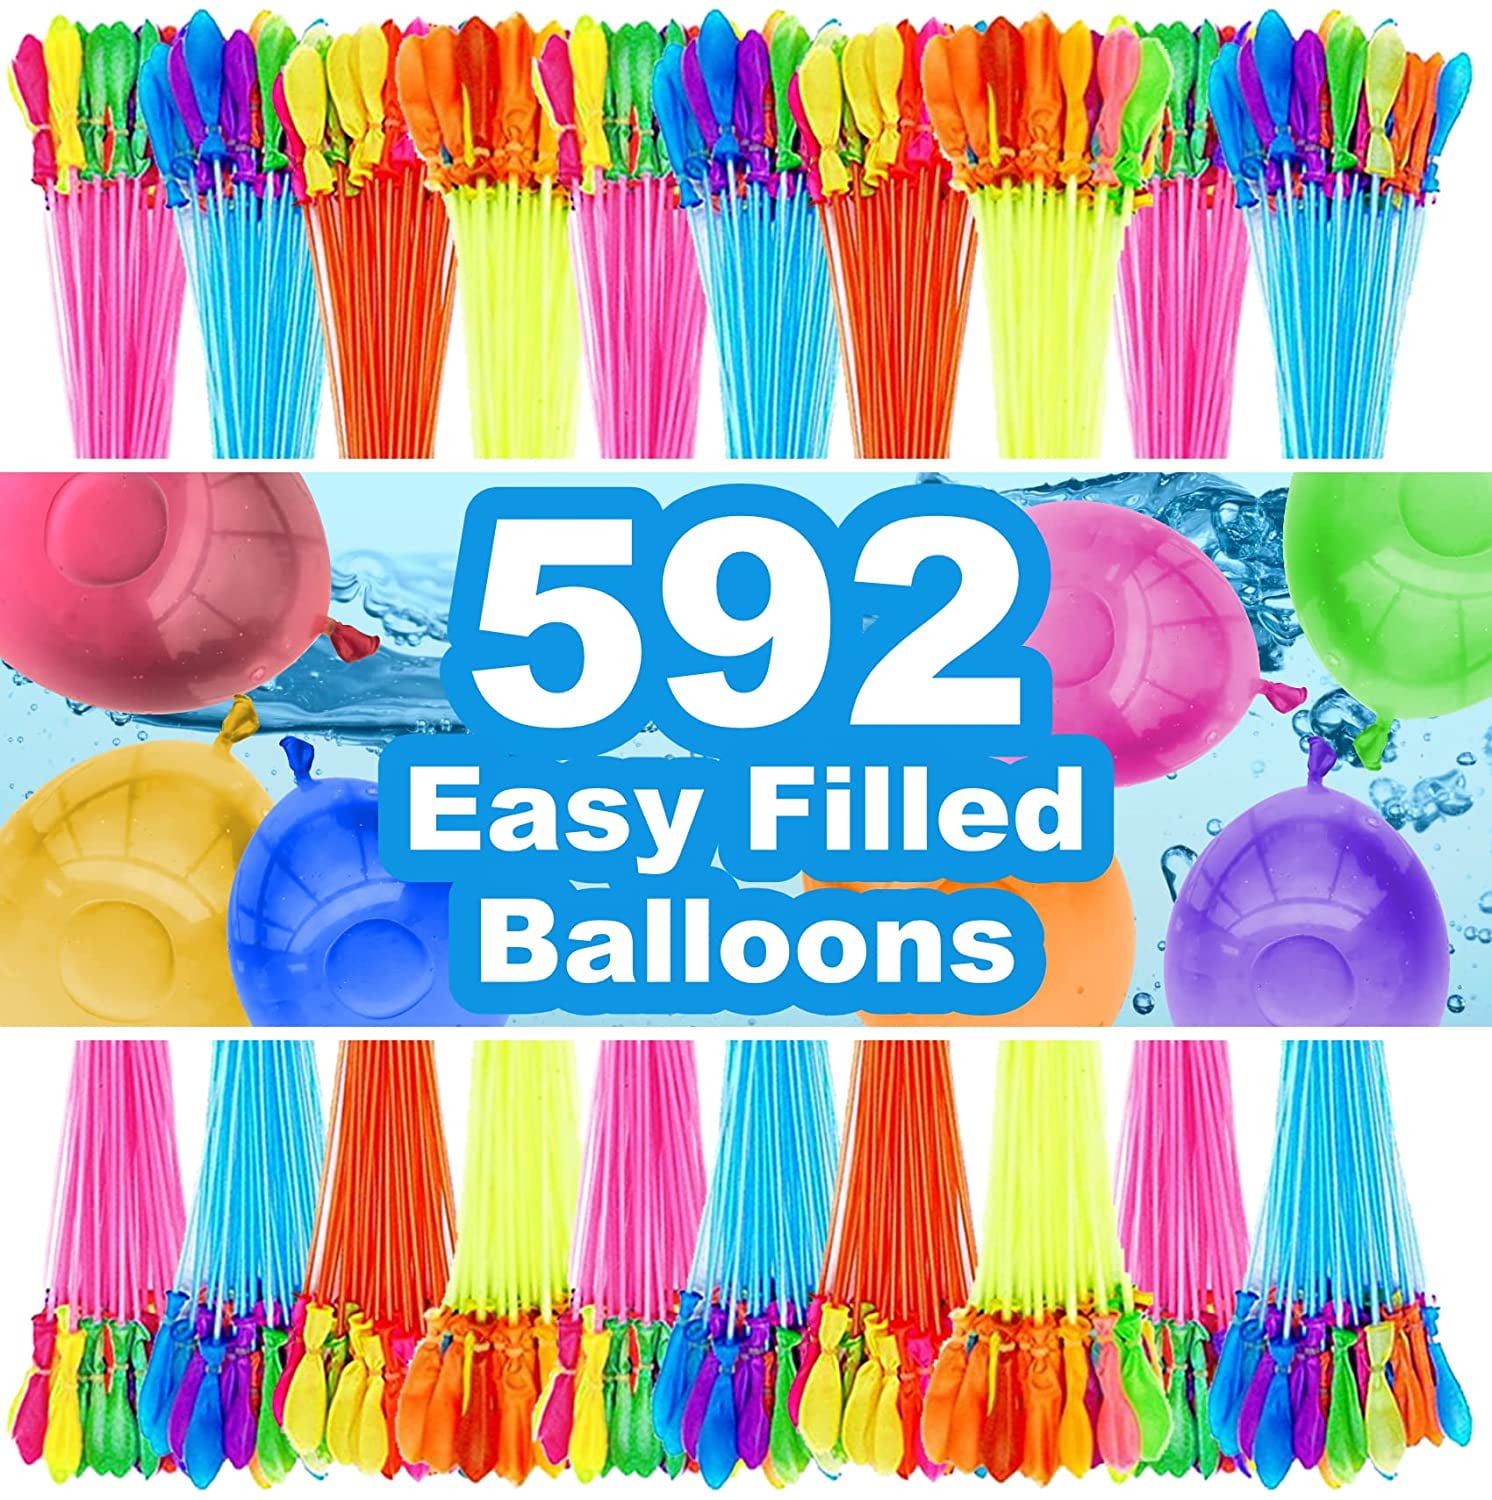 Swimming Pool Outdoor Summer Fun 592 Pack Water Balloons for Kids Girls Boys Balloons Set Party Games Quick Fill Water Balloons 